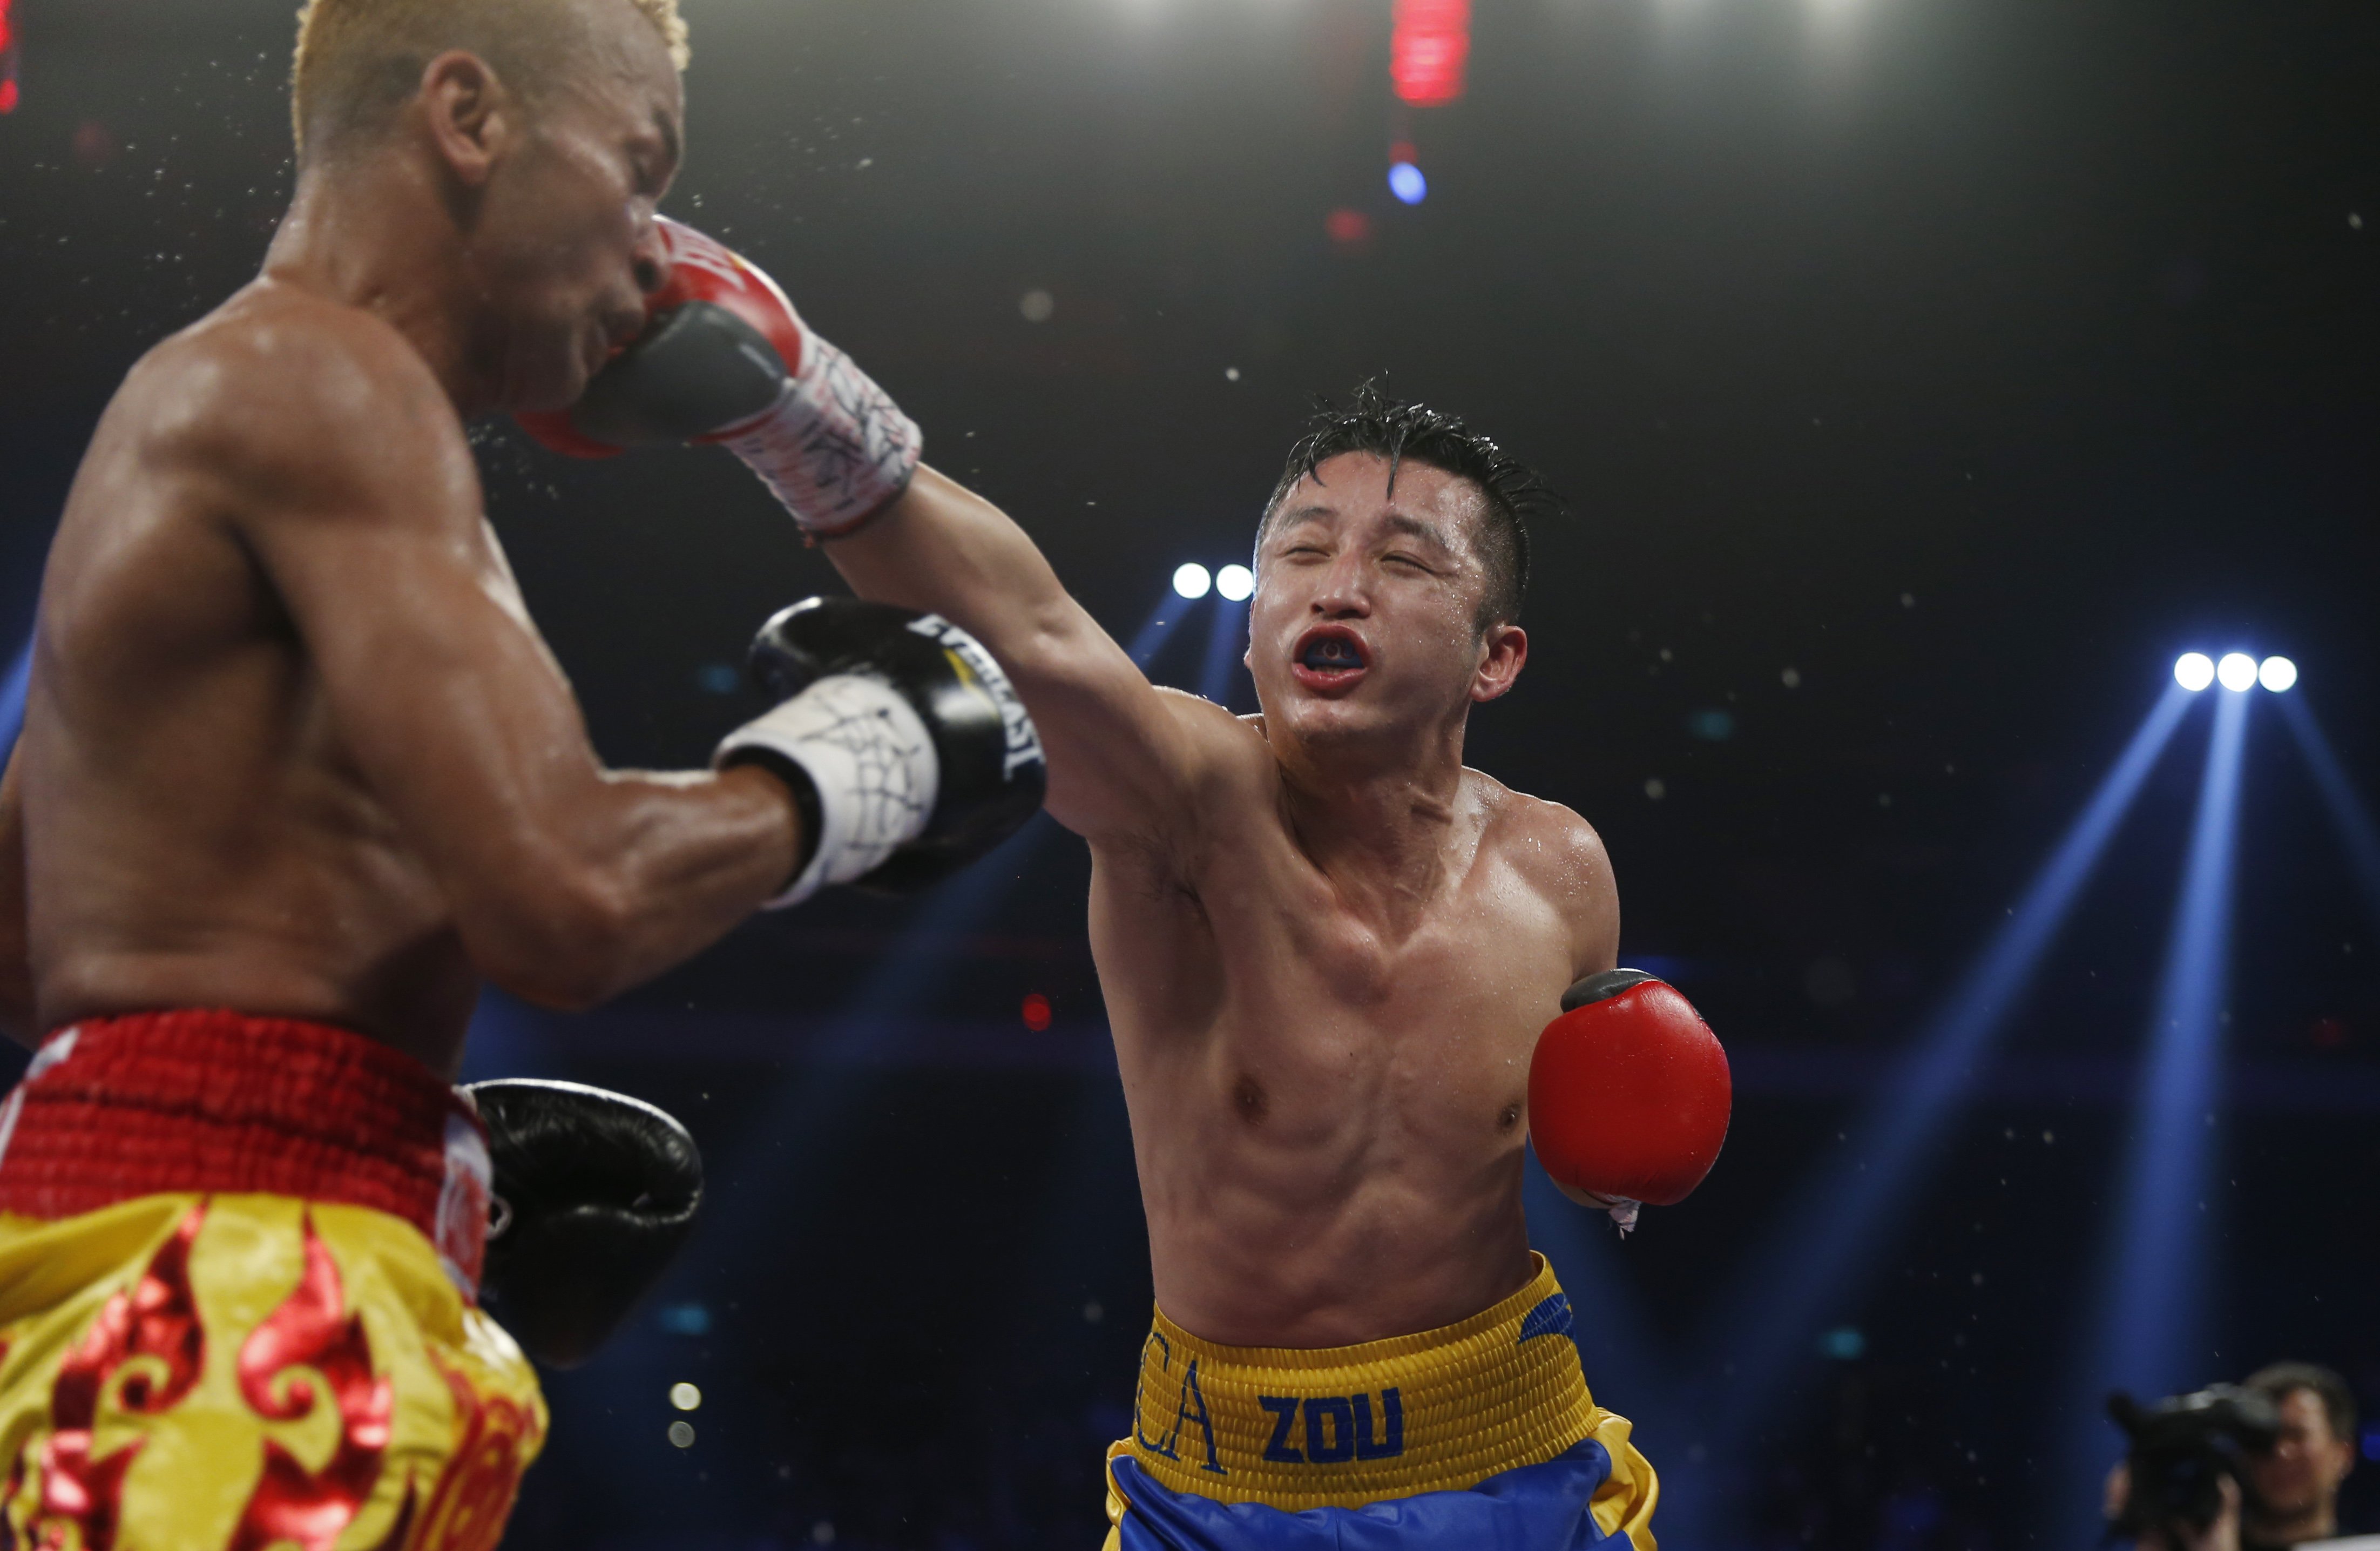 China's double Olympic gold medalist Zou Shiming, right, and Thailand's Amnat Ruenroeng exchange punches during their IBF flyweight title belt boxing match at the Venetian Macao in Macau, Saturday, March 7, 2015. Ruenroeng won the IBF flyweight title belt boxing match. (AP Photo/Kin Cheung)